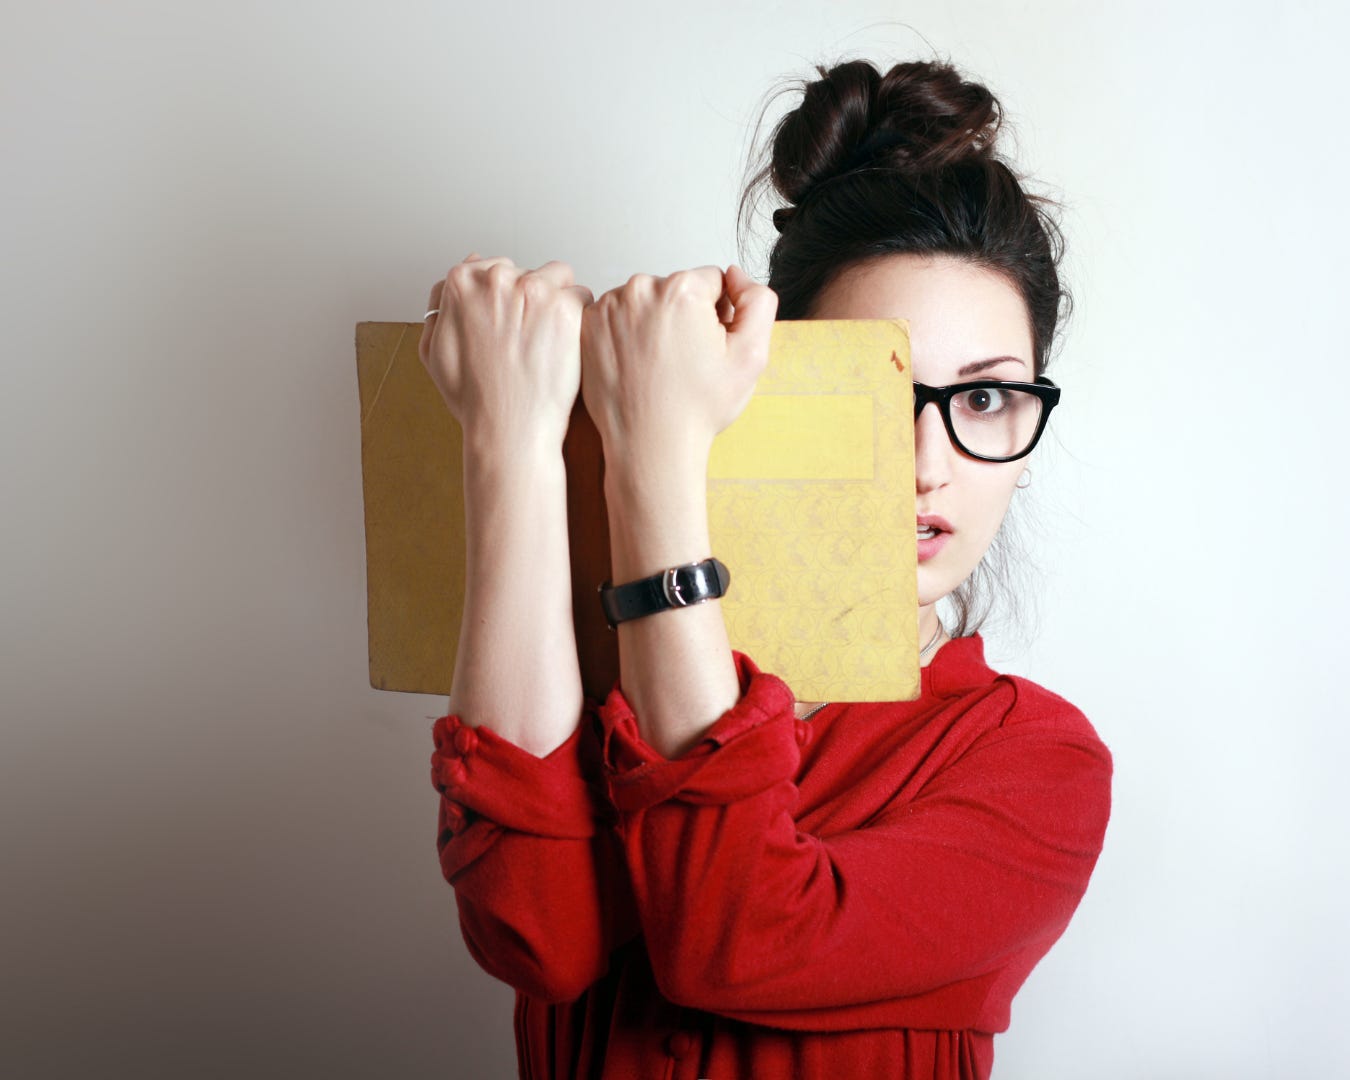 A woman wearing glasses partially hides her face behind the book she is holding in front of her.